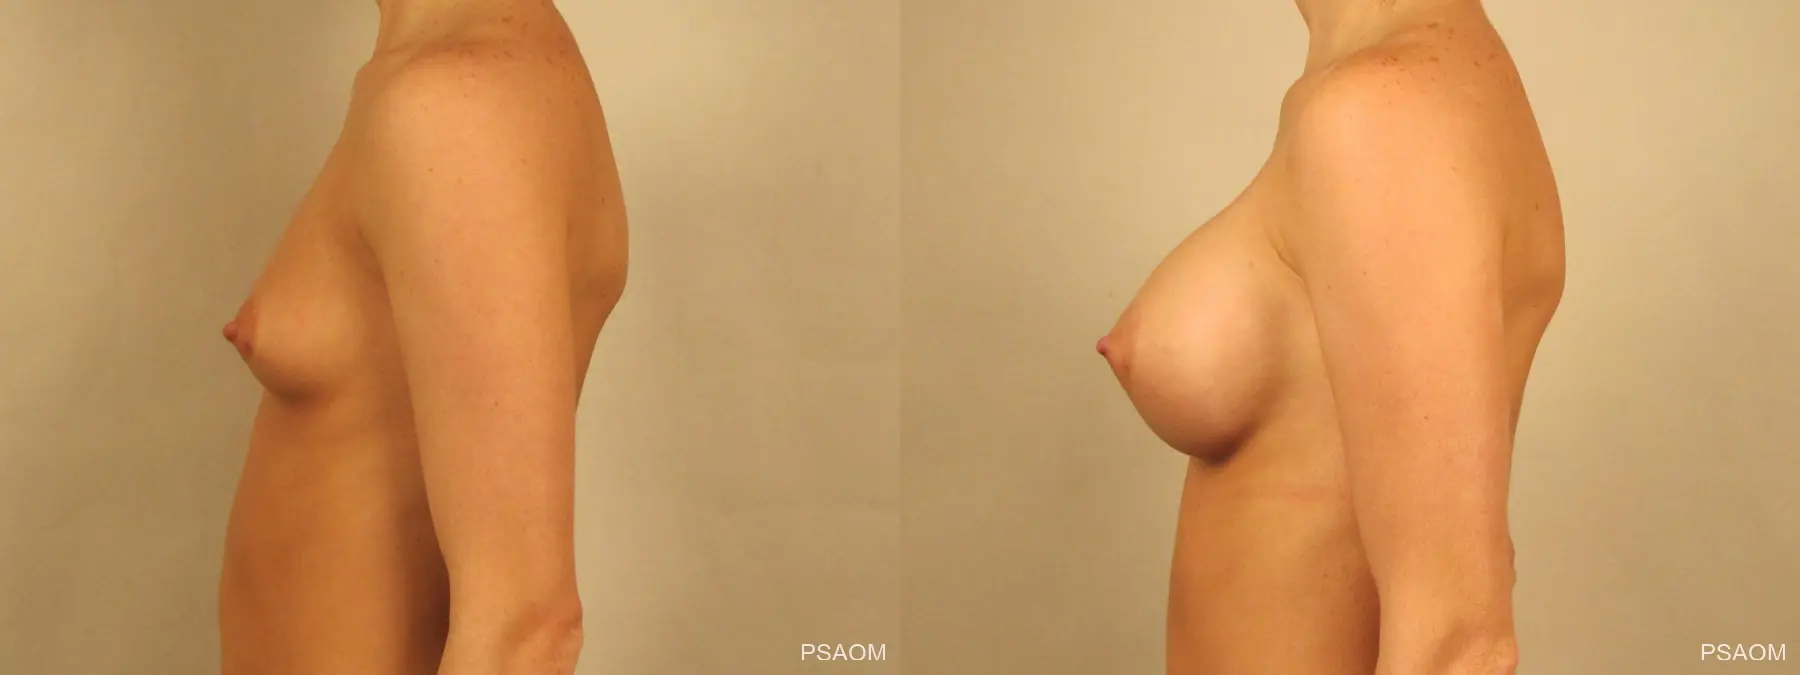 Breast Augmentation: Patient 2 - Before and After 2